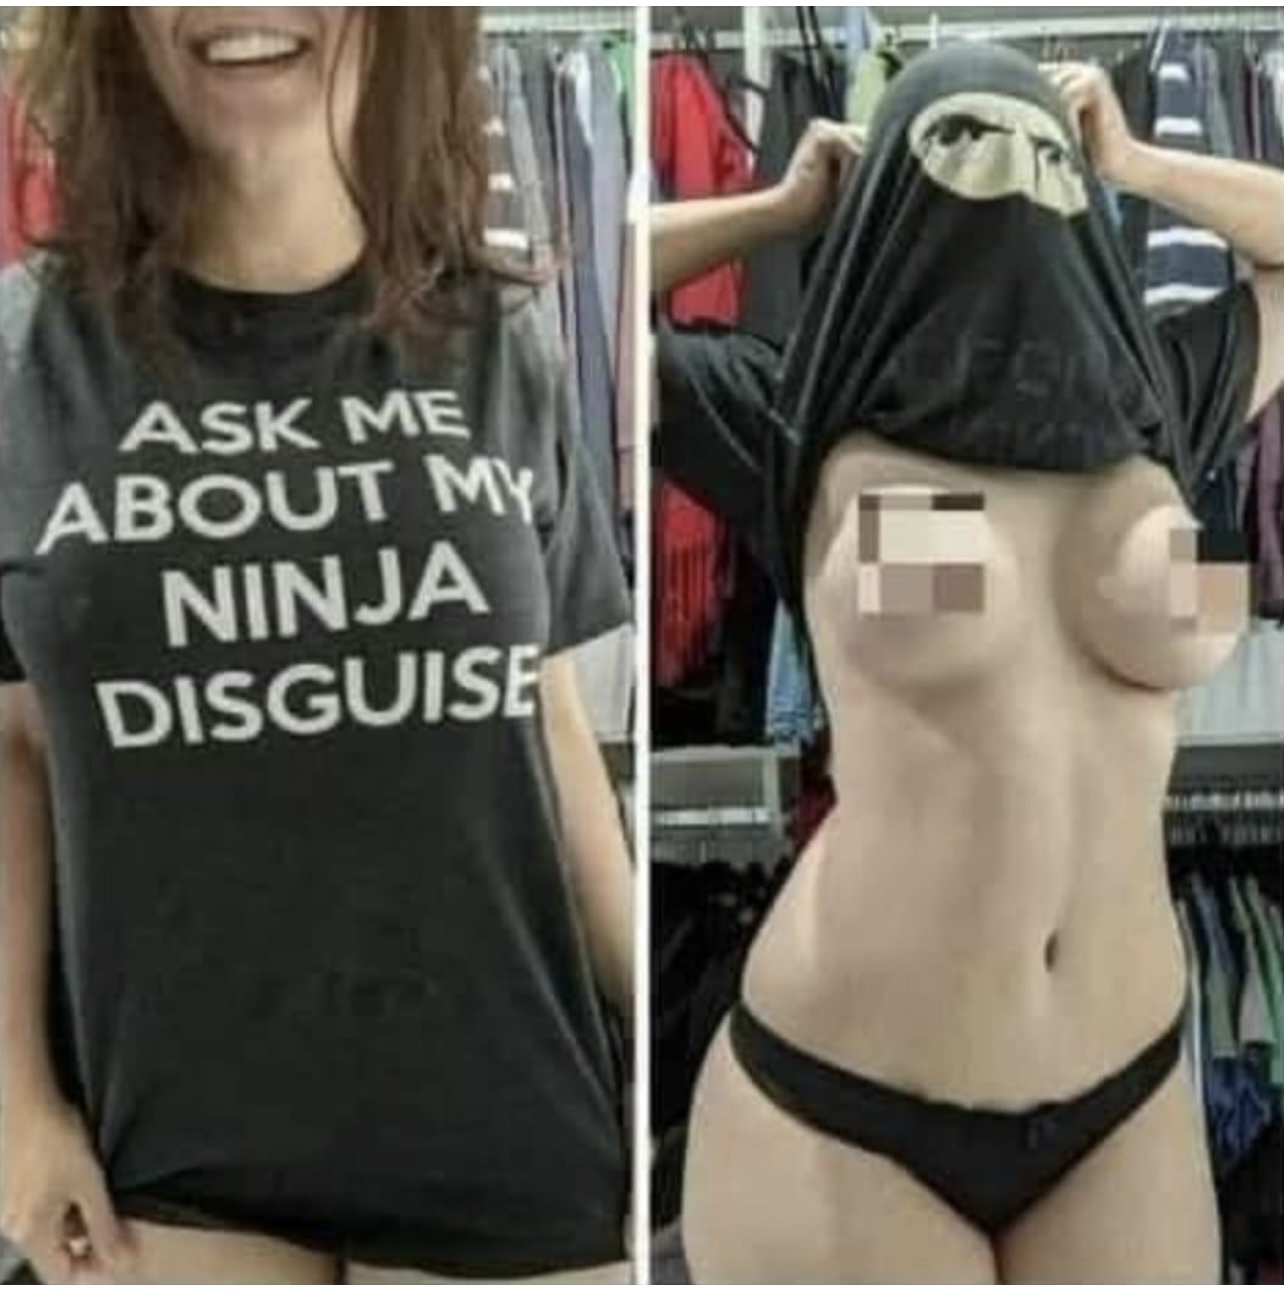 ali duval recommends ask me about my ninja disguise boobs pic